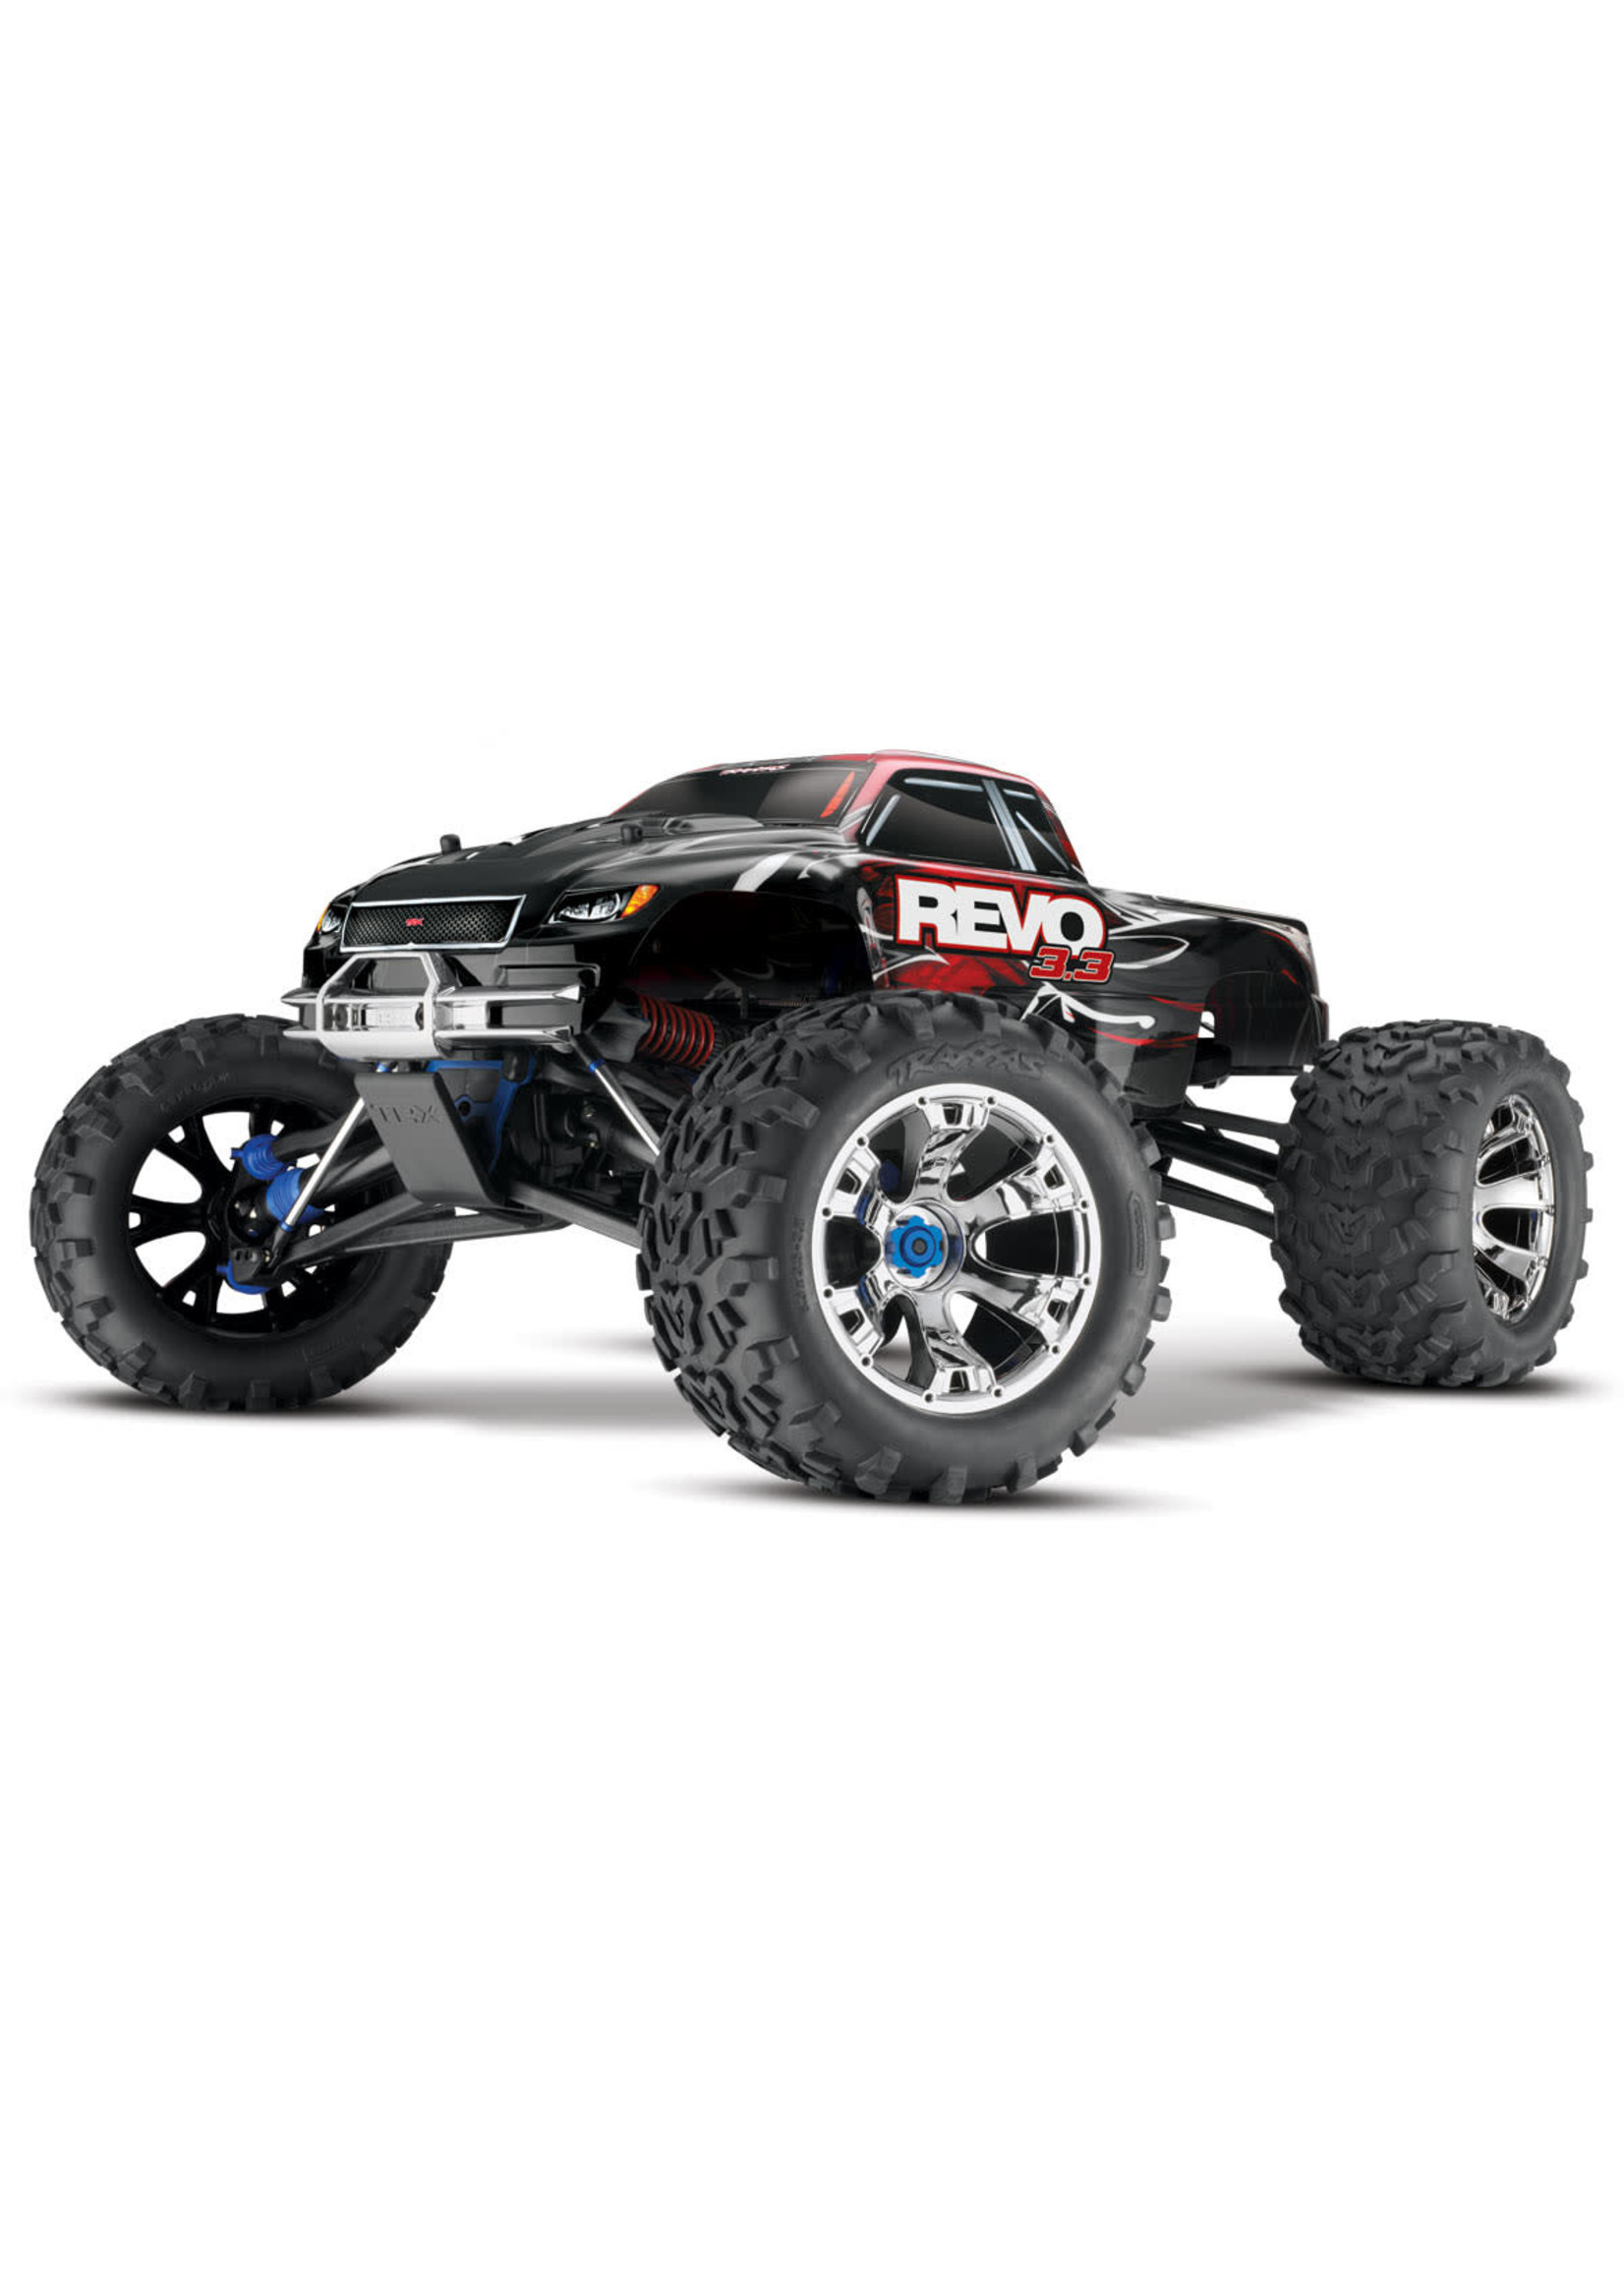 Traxxas TRA53097-3 Traxxas Revo 3.3: 1/10 Scale 4WD Nitro-Powered Monster Truck (with Telemetry Sensors) with TQi 2.4Ghz Radio System, Traxxas Link Wireless Module, And Traxxas Stability Management (TSM)